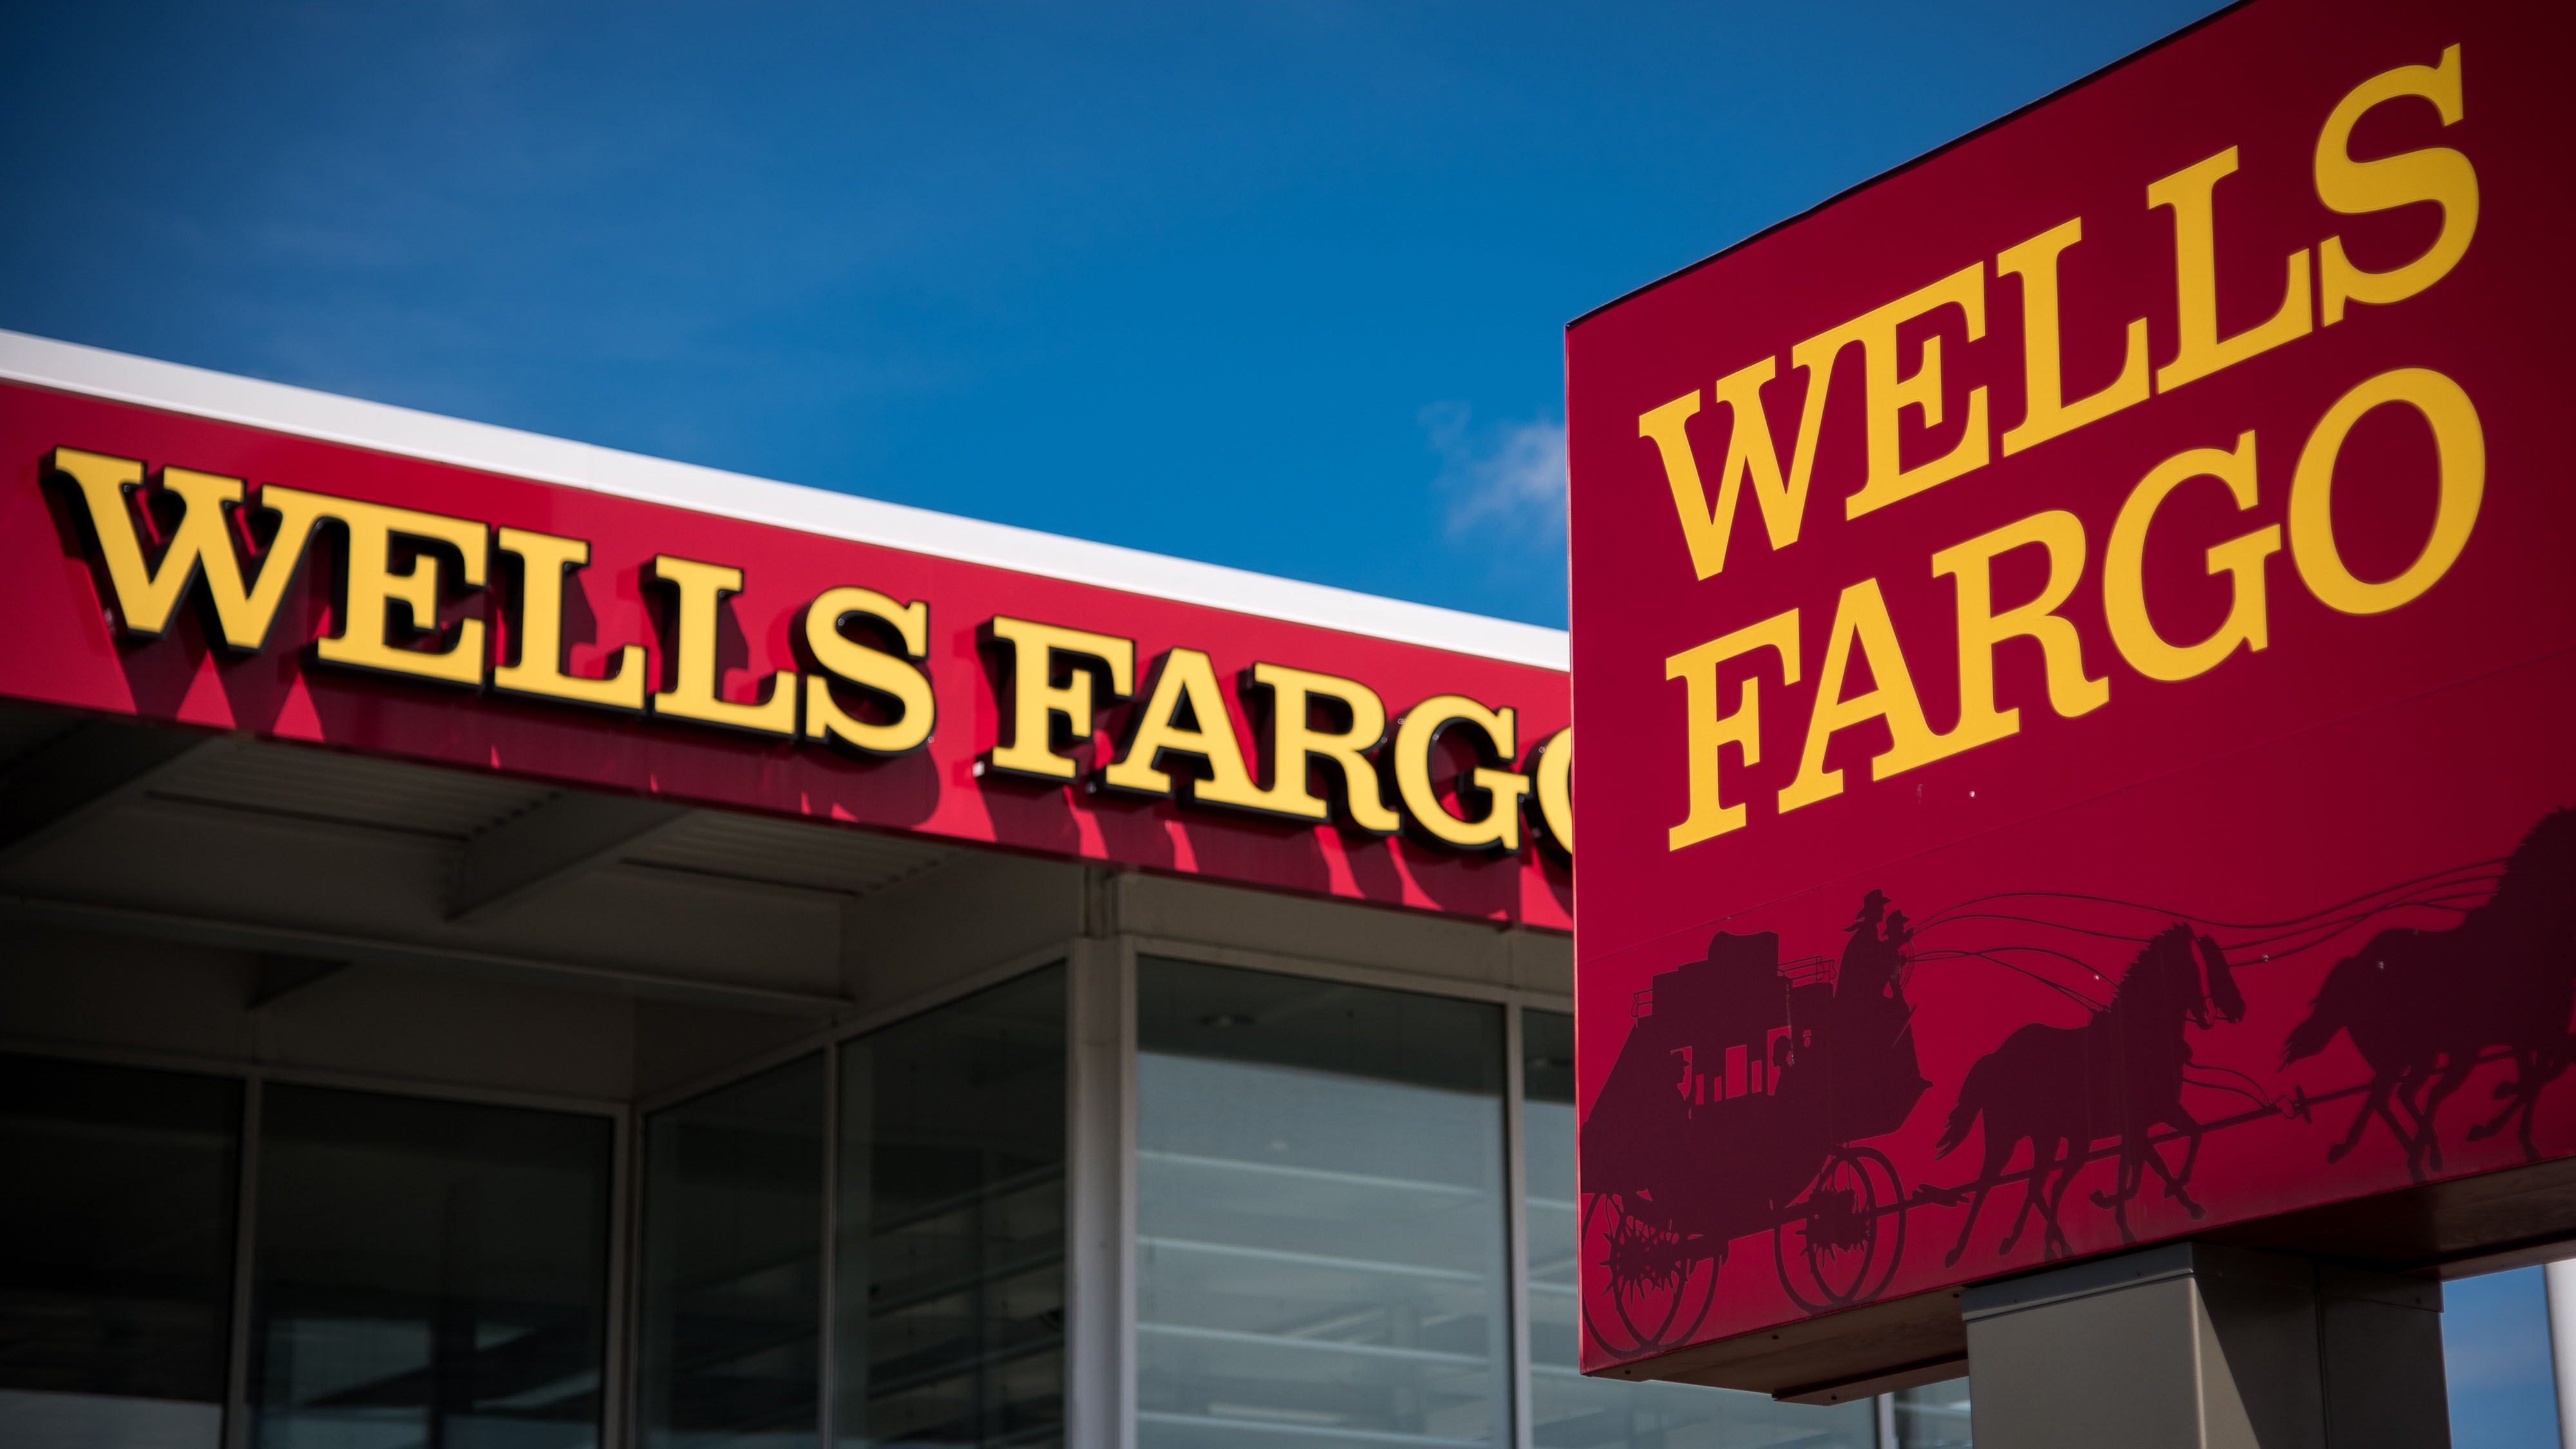                      Post Wells Fargo Fake Accounts Scandal -- How is Signing Up For A Wells Fargo Account?                             
                     